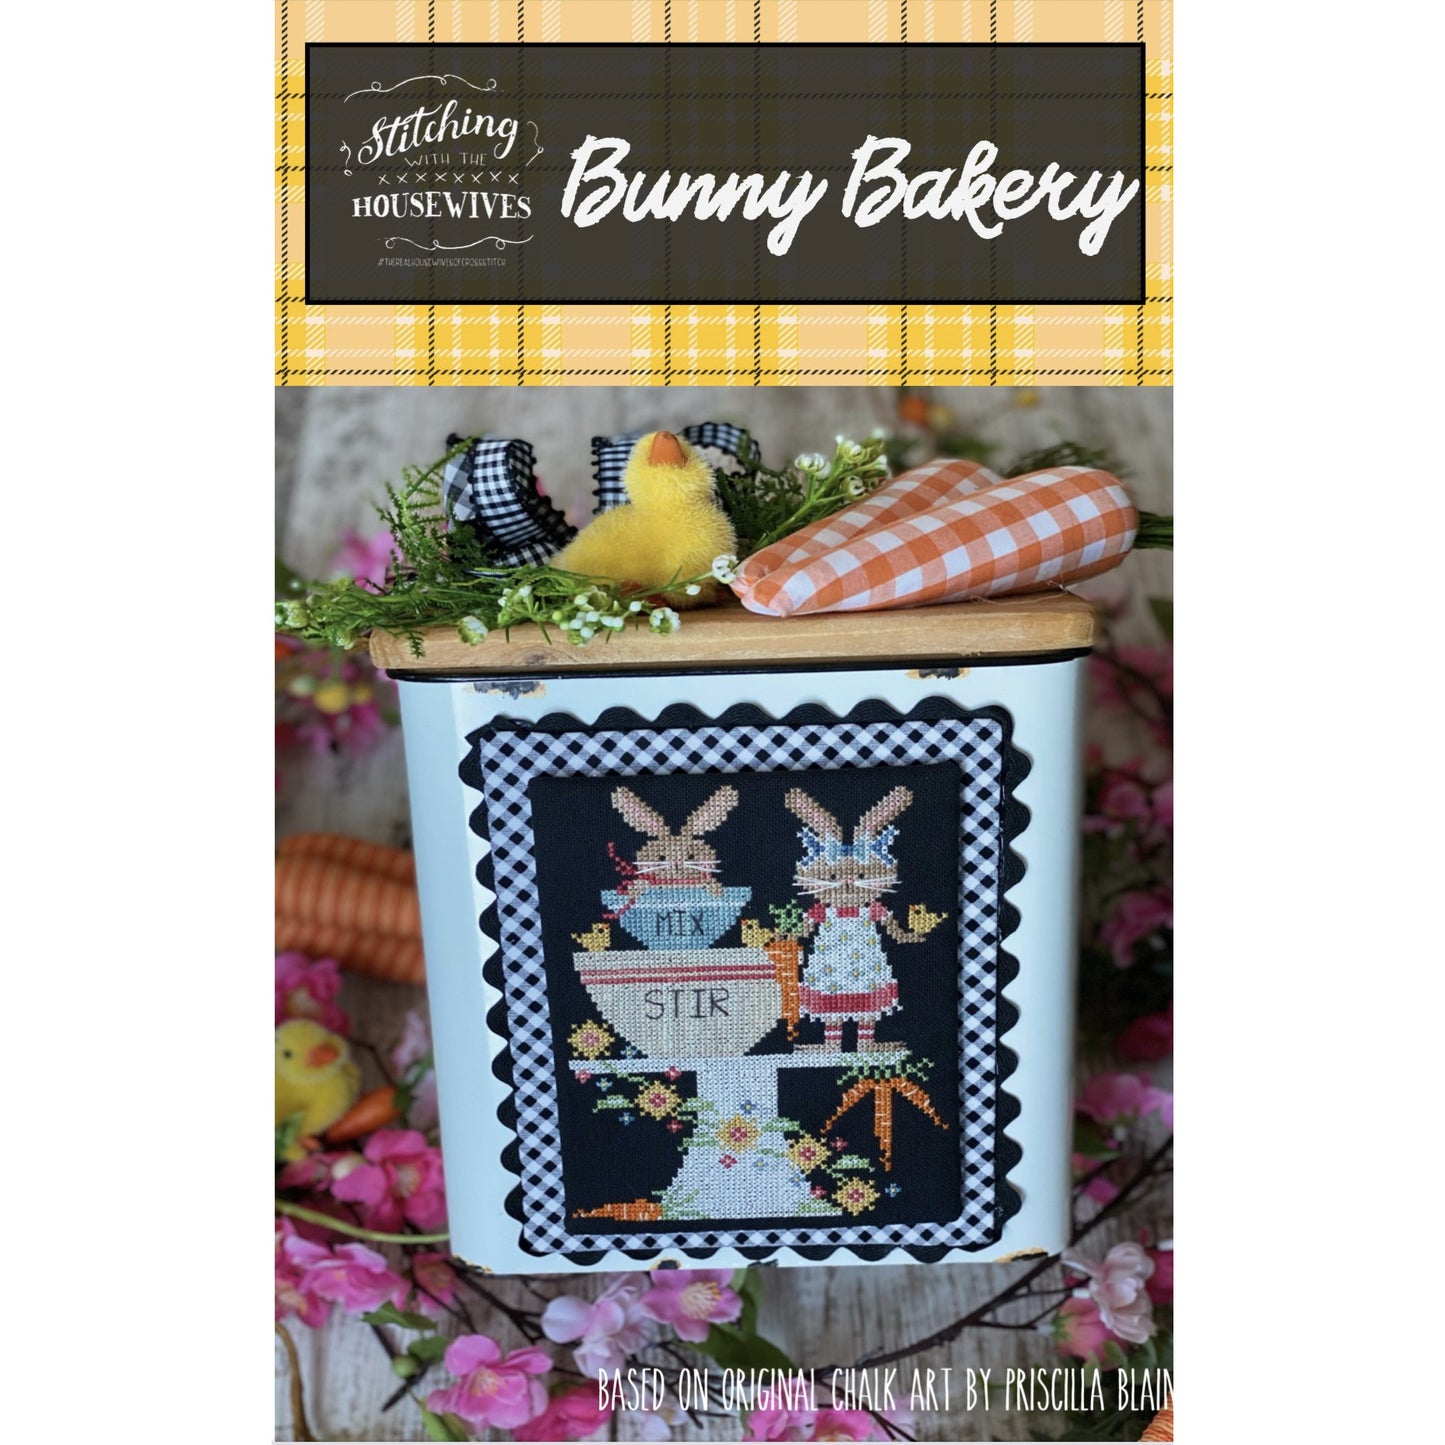 Stitching Housewives ~ Bunny Bakery Pattern